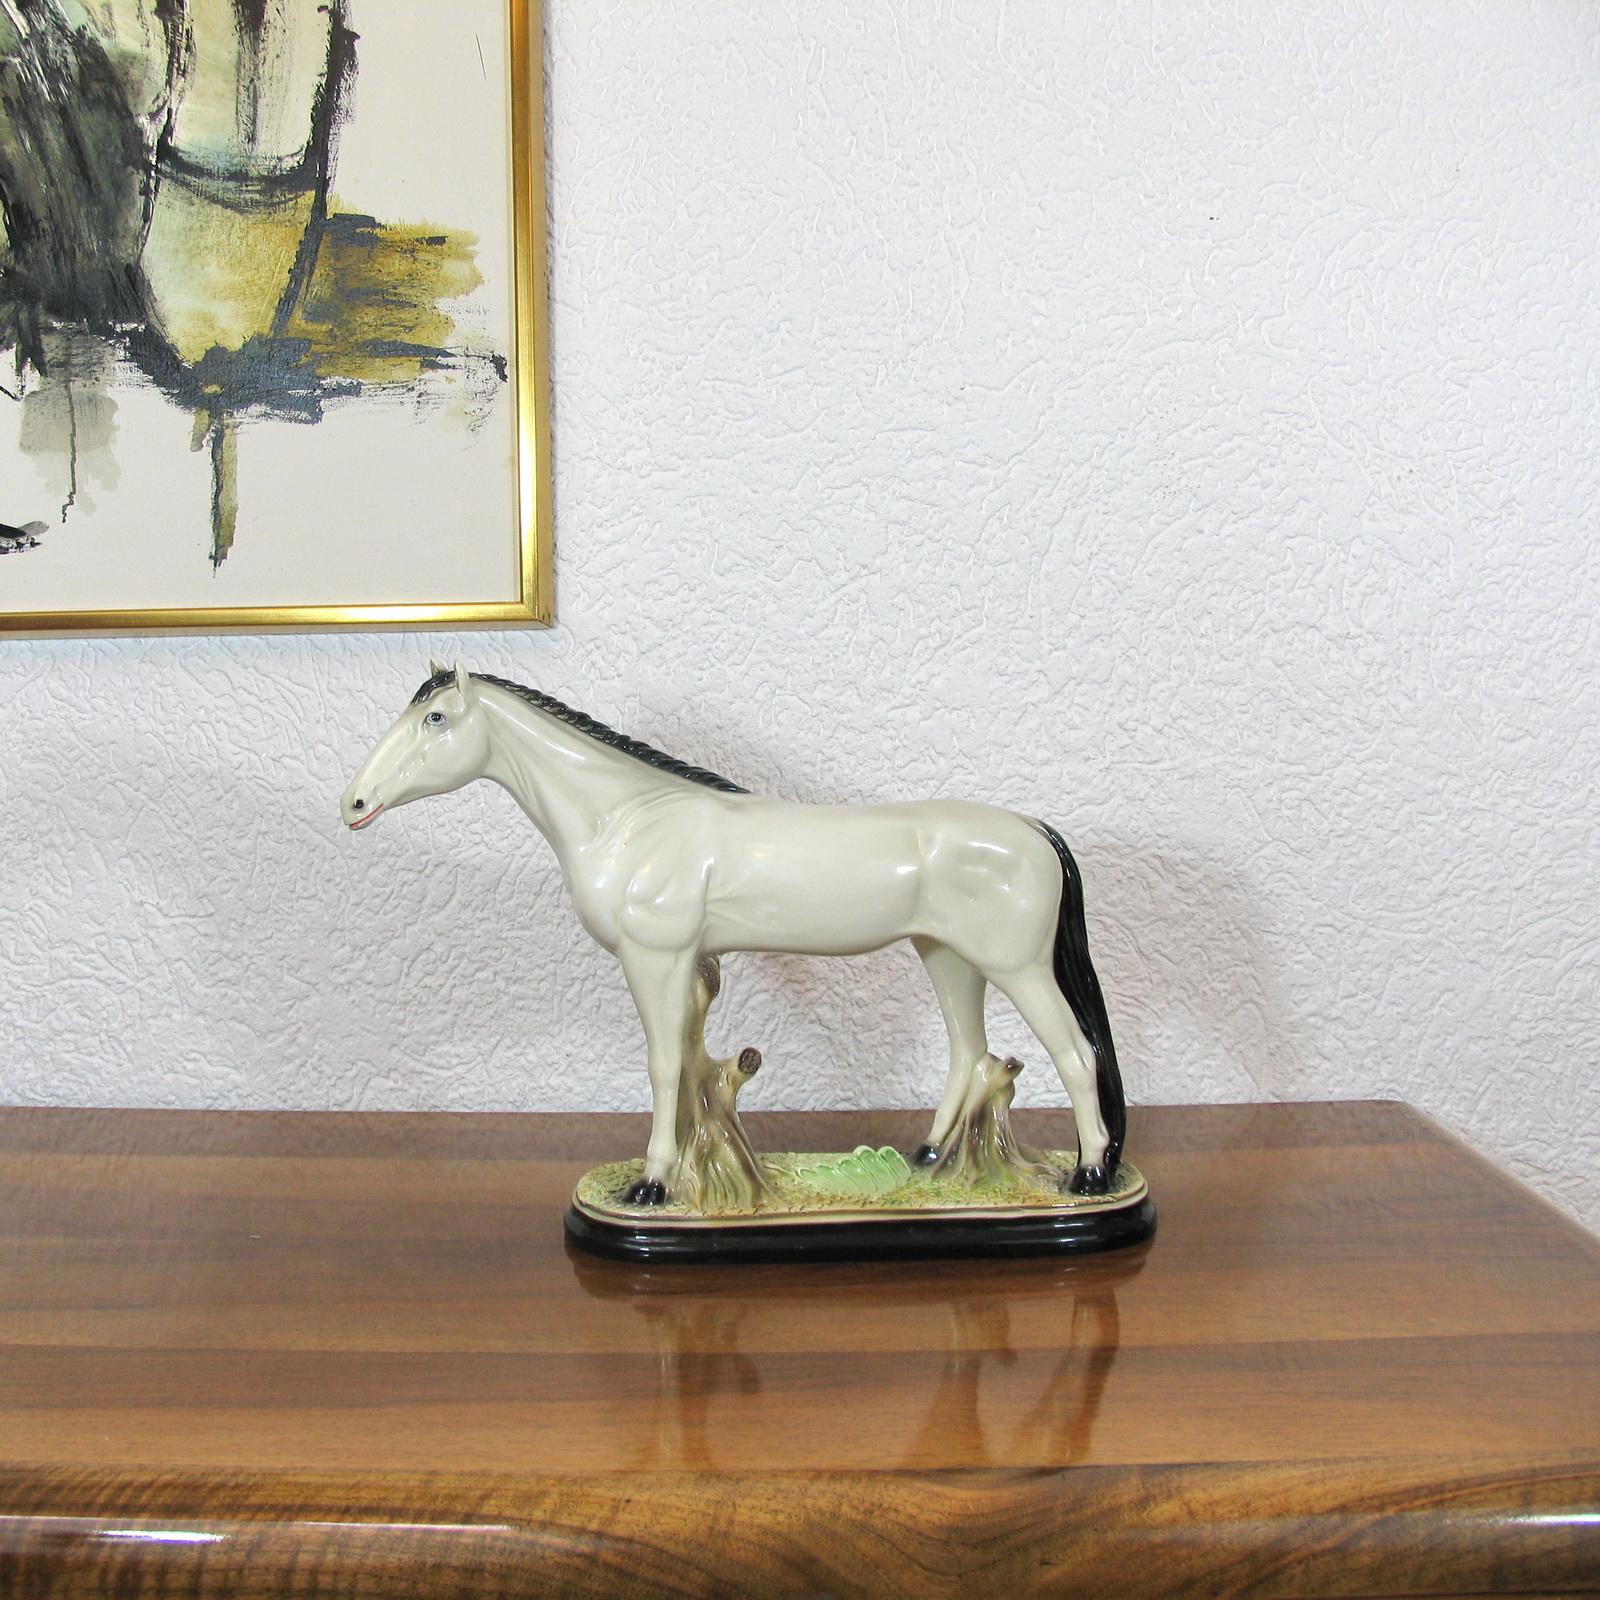 Very decorative white Staffordshire Horse dating from the end of the 19th century, early 20th century. Modeled in a standing stance with the head held high. Excellent hand-painted details. It is in lovely, clean condition overall, except for a small